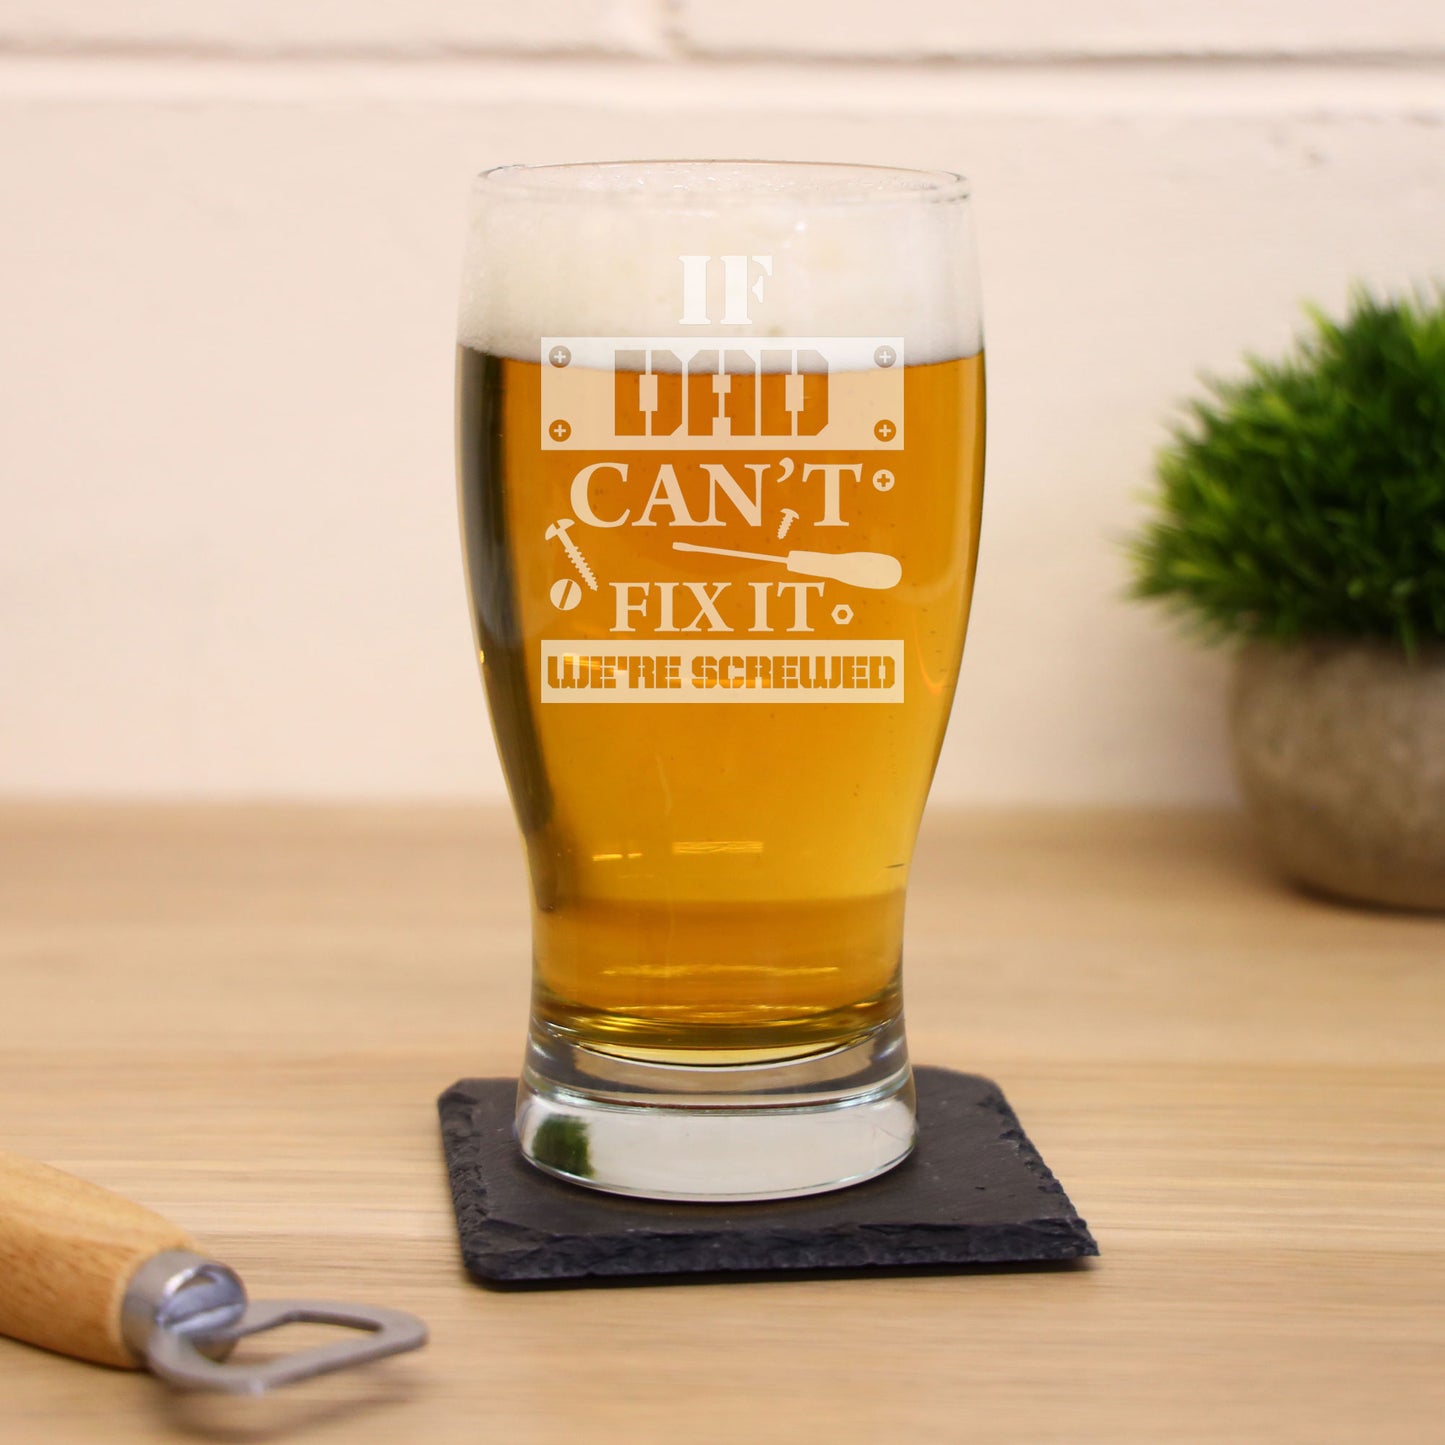 Engraved "If Dad Can't Fix It We're Screwed" Beer Glass and/or Coaster Set  - Always Looking Good -   